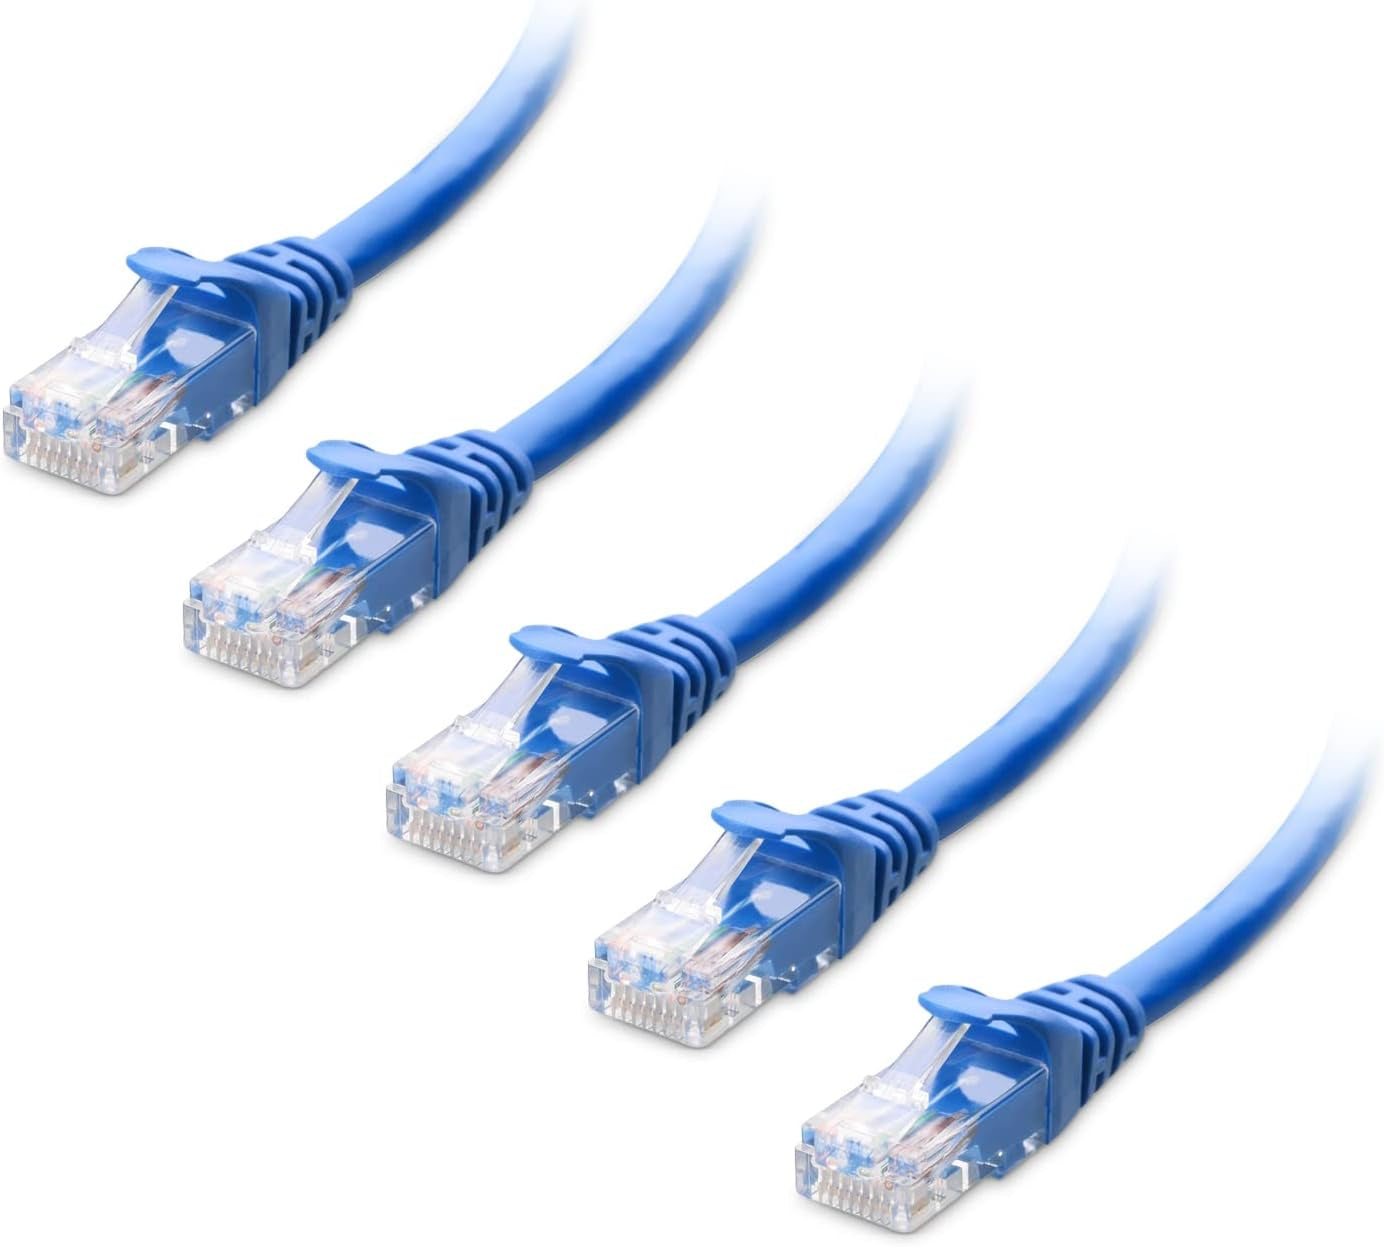 CAT 6 ETHERNET CABLE